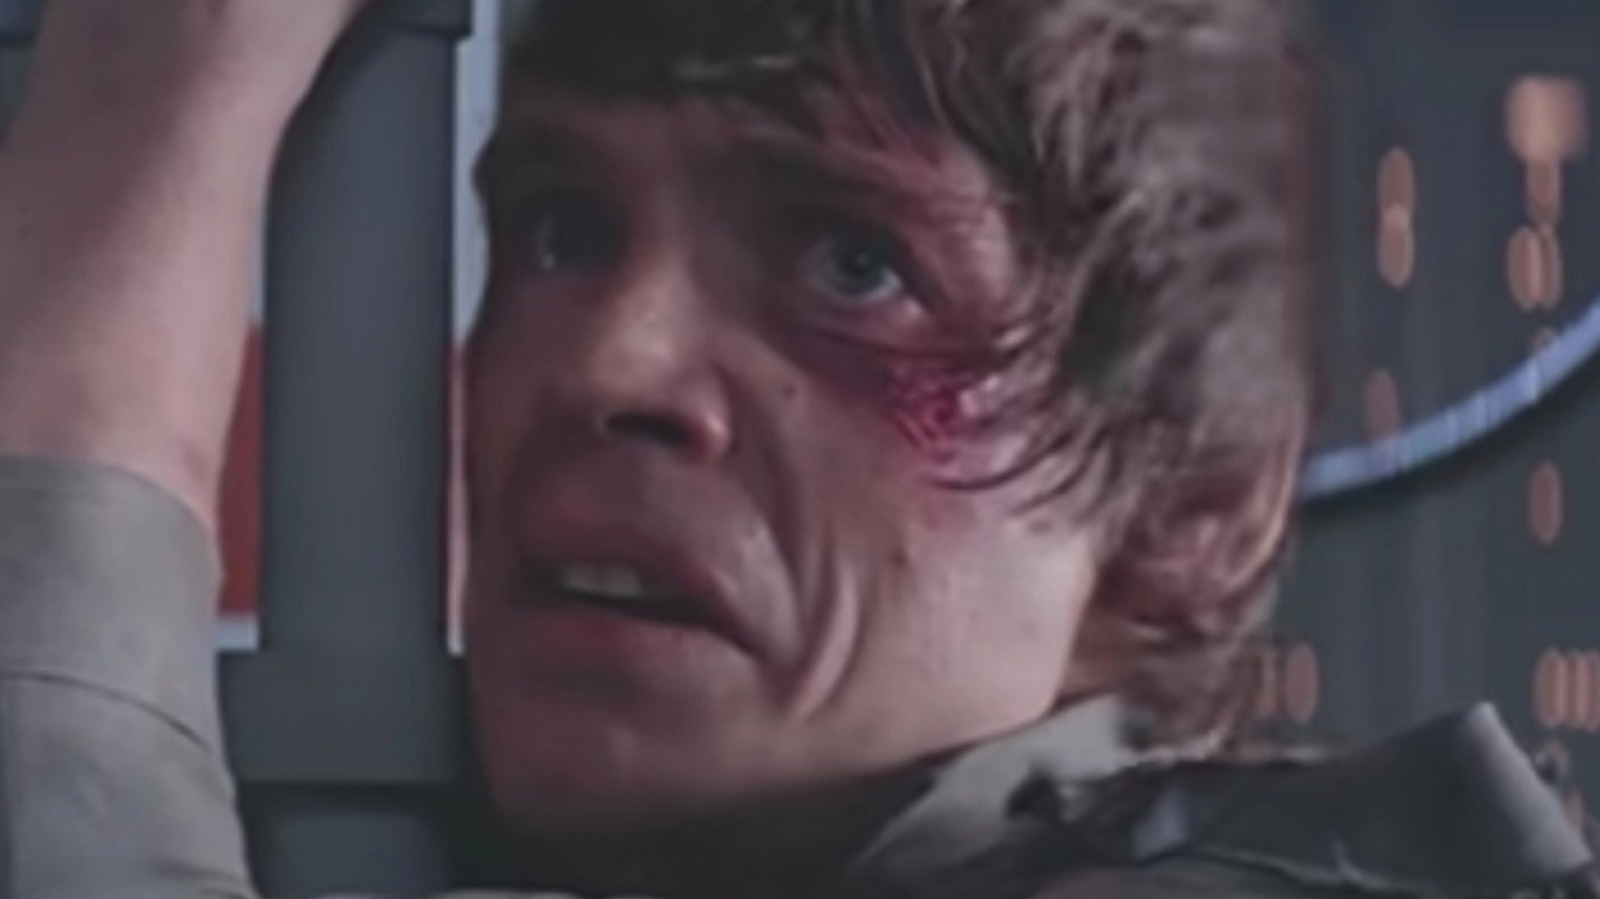 The Accident That Mark Hamill Thought Would Ruin His Career